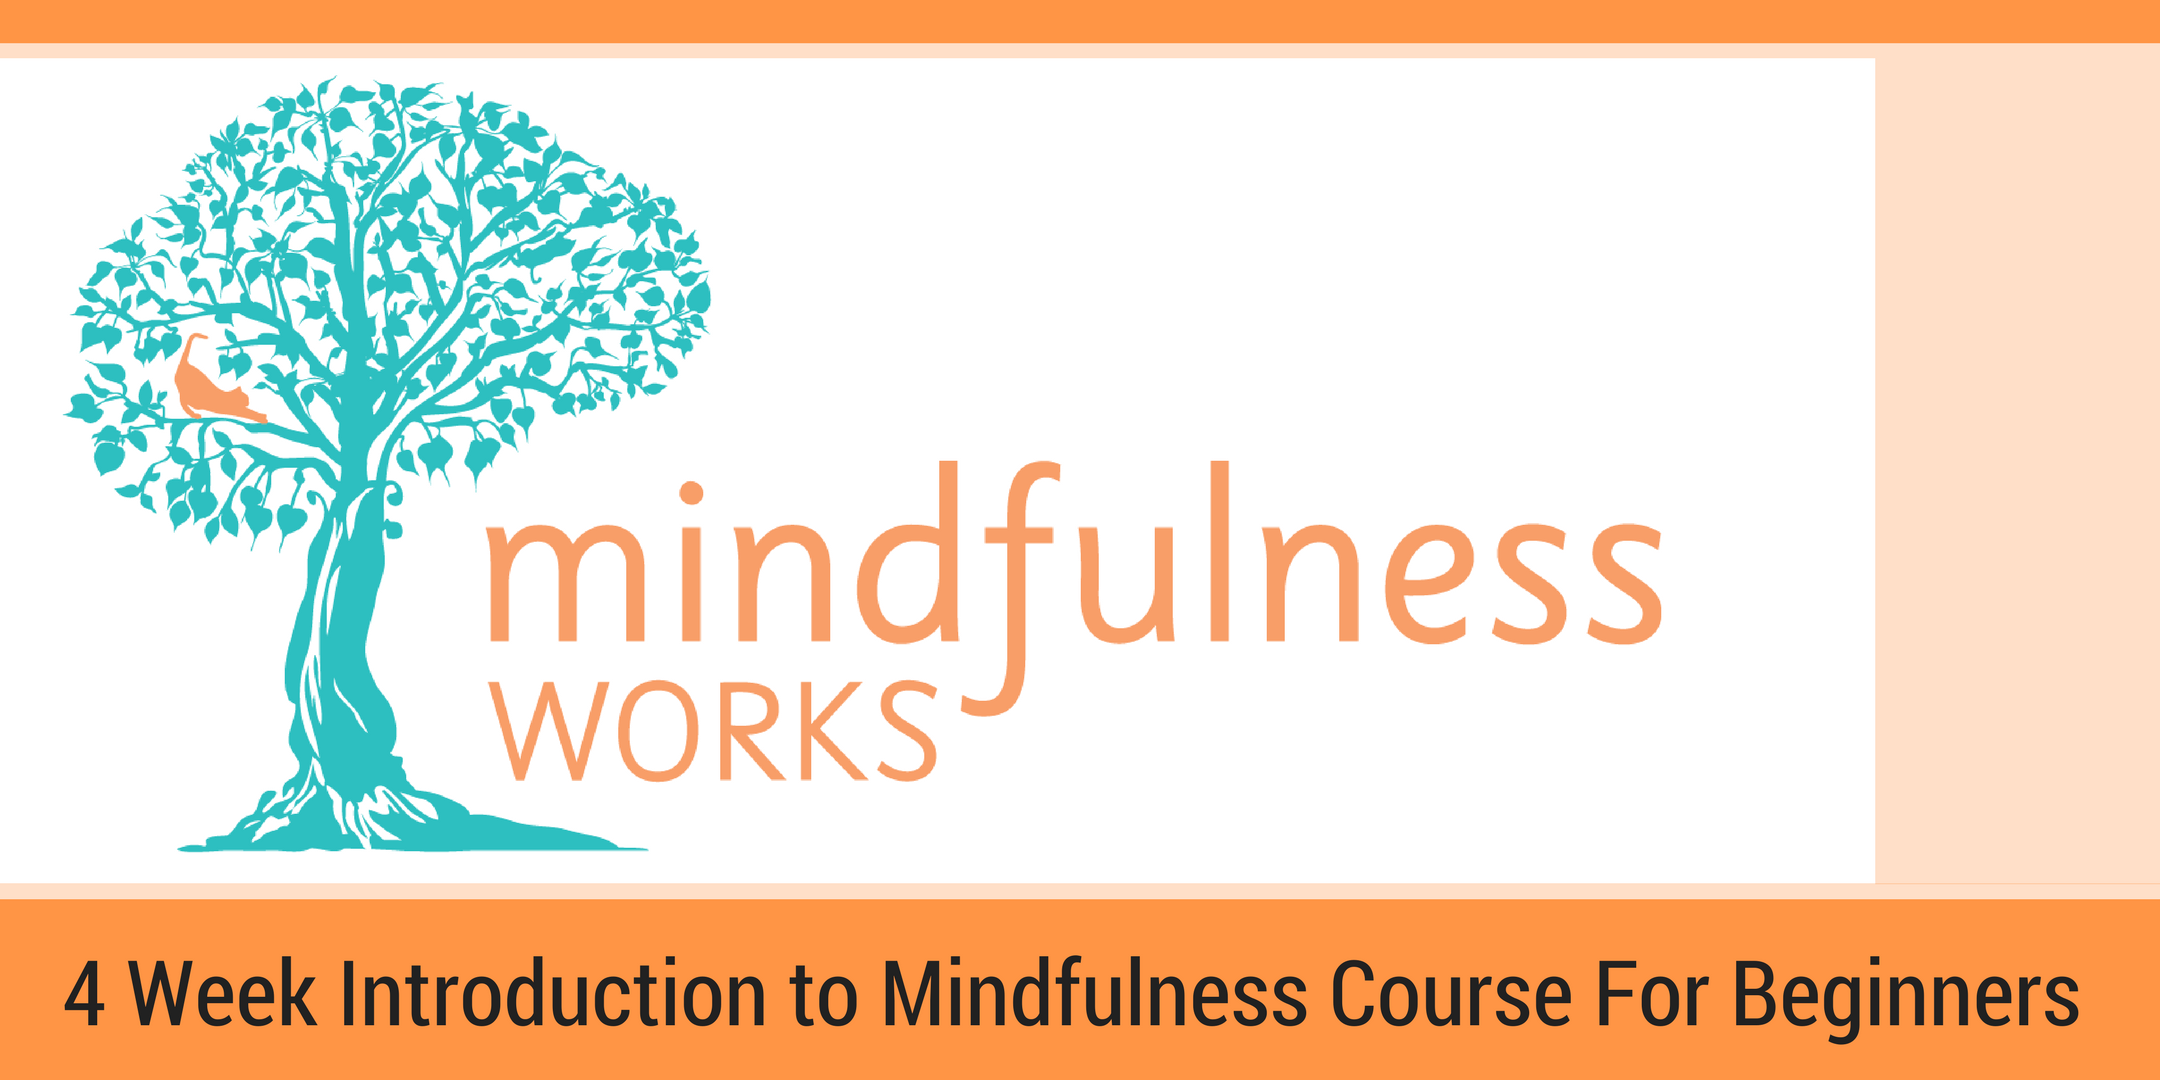 Canberra (Dickson) – An Introduction to Mindfulness & Meditation 4 Week Course 